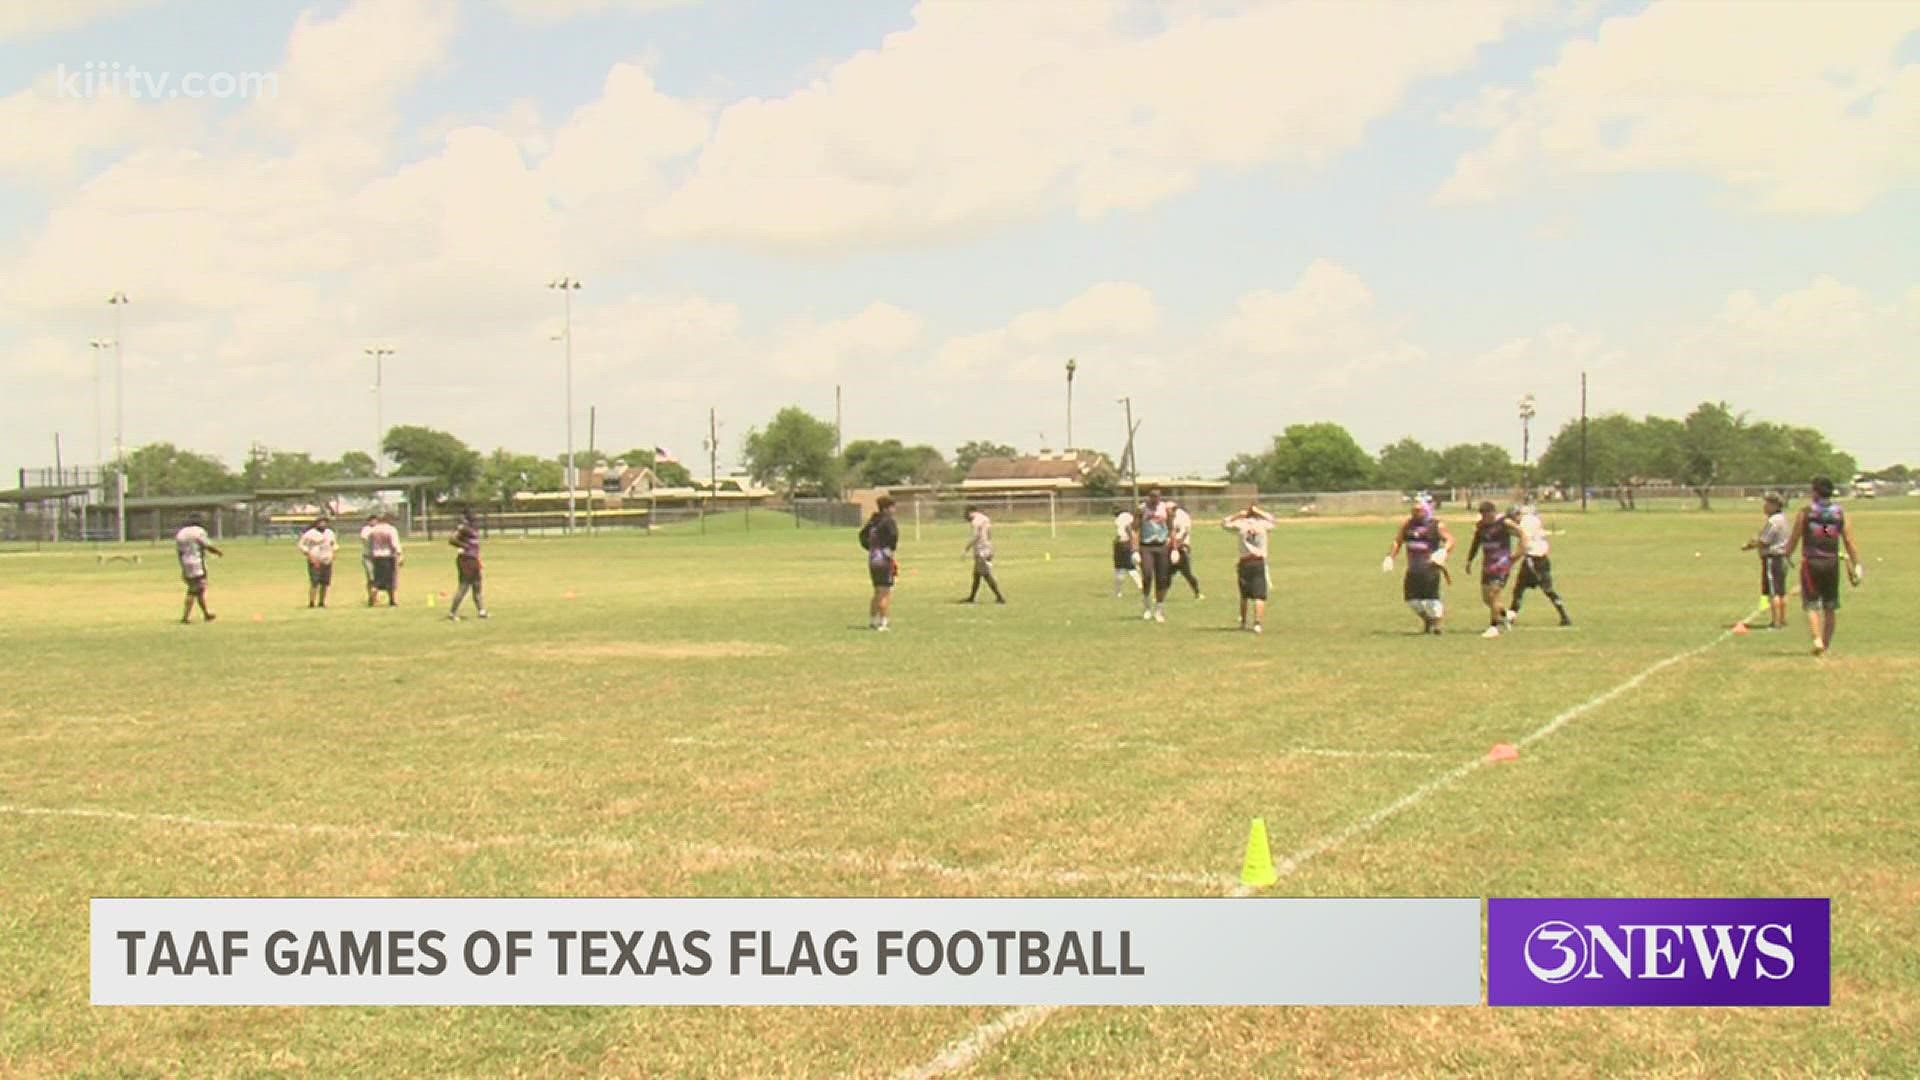 It was a busy day in Corpus Christi as the TAAF games continued Saturday with beach volleyball, boxing, disc golf, flag football, softball, and tennis.